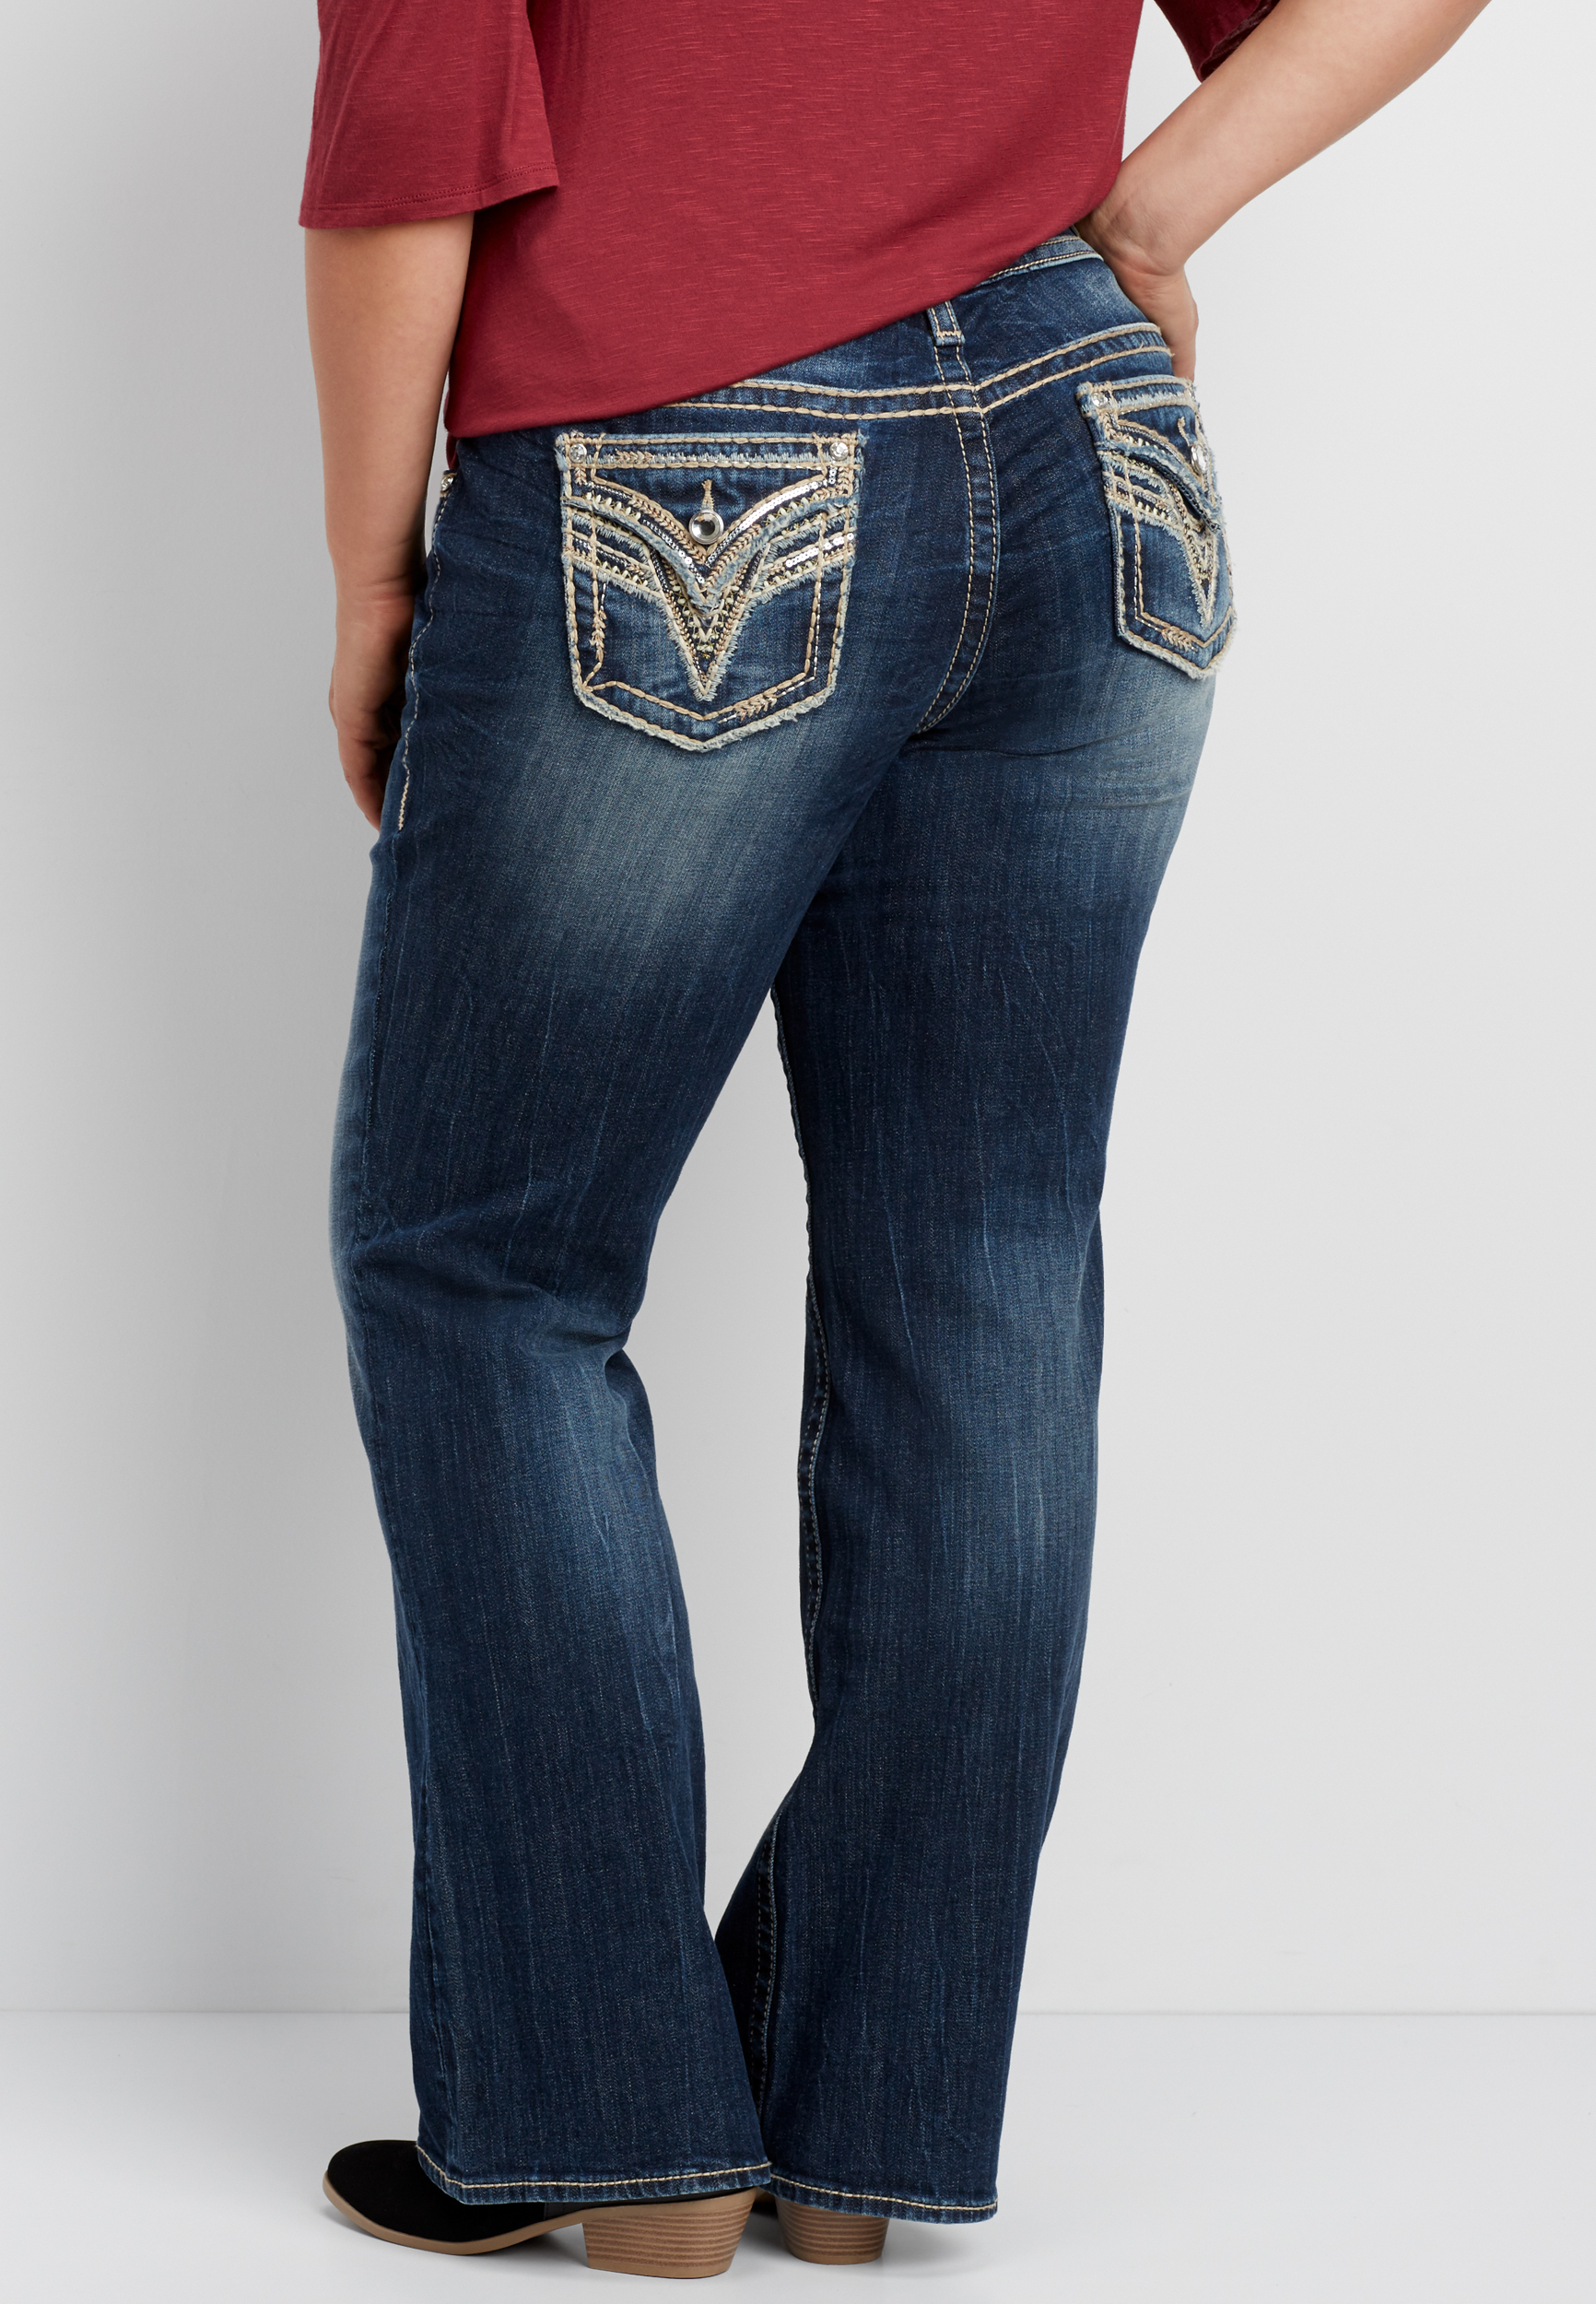 jeans with rhinestones on back pockets